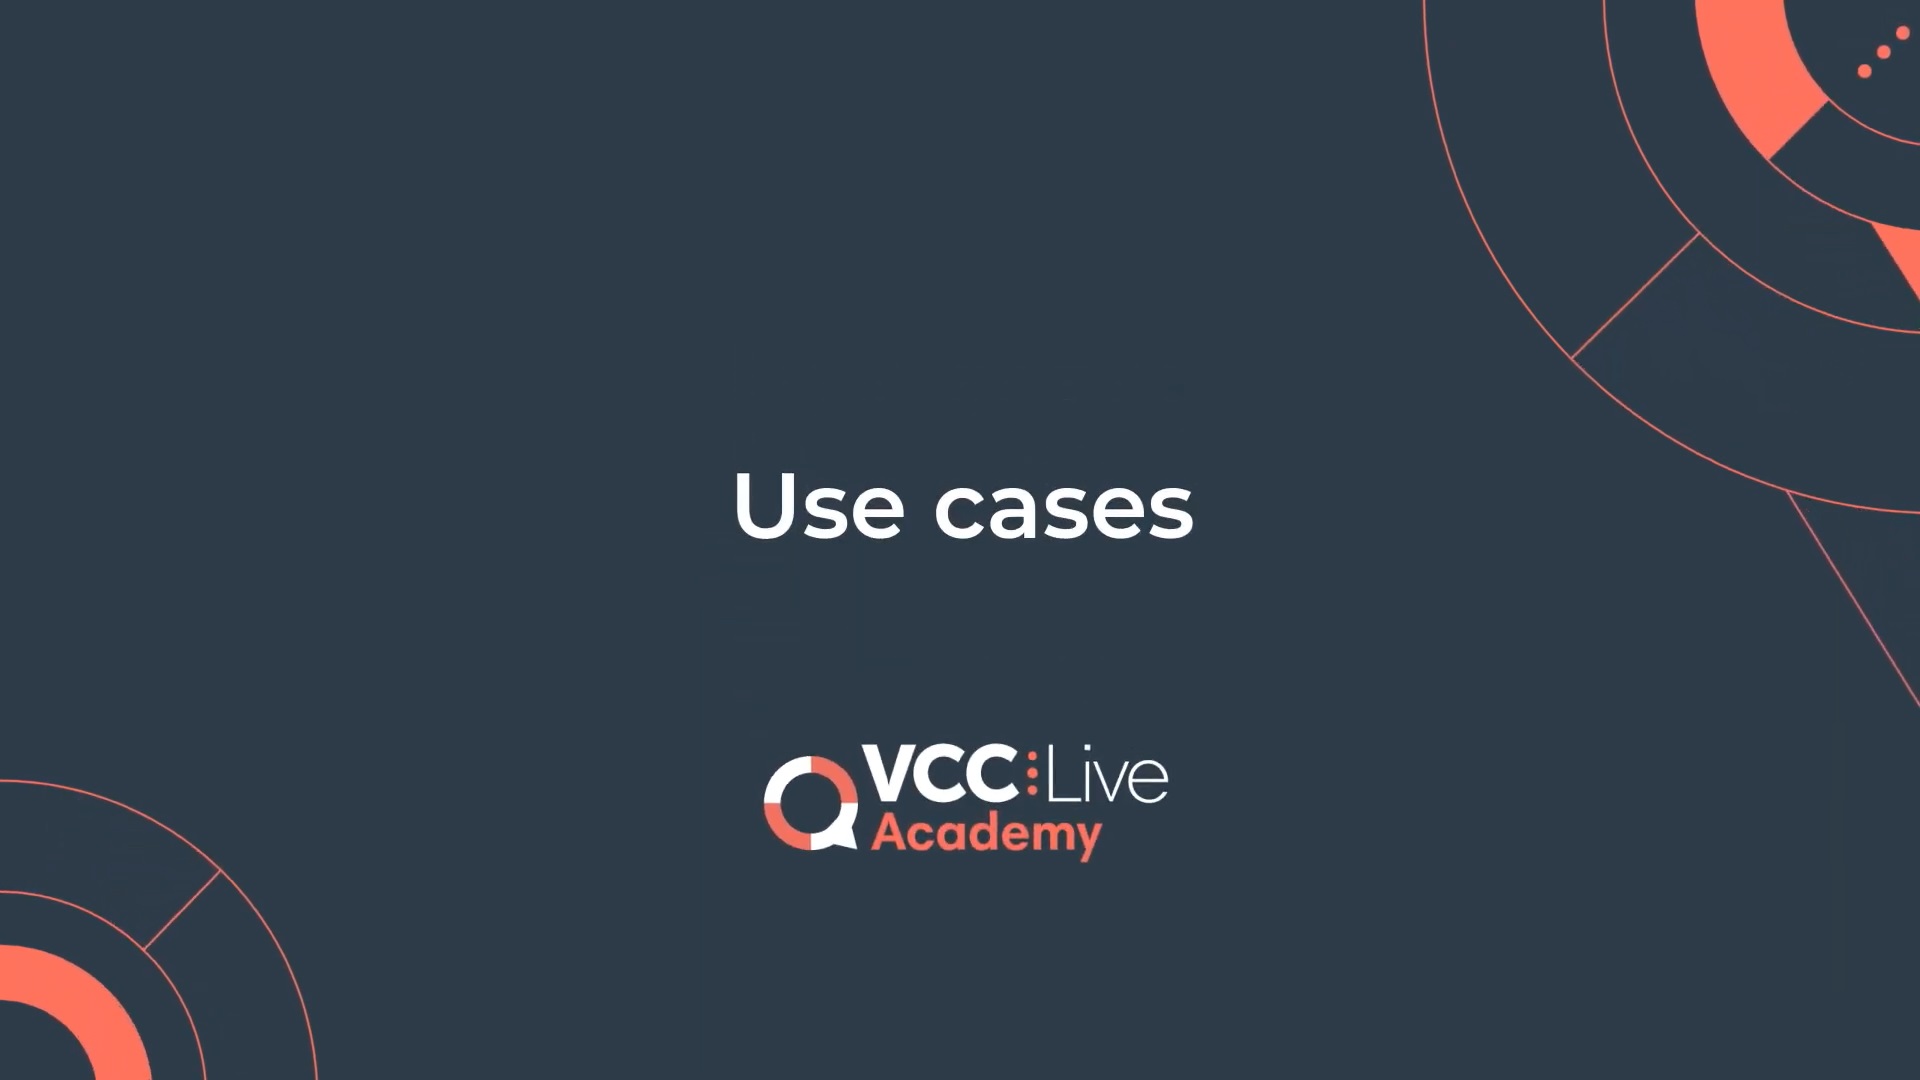 https://vcc.live/wp-content/uploads/2022/07/dialer-course-use-cases.jpg